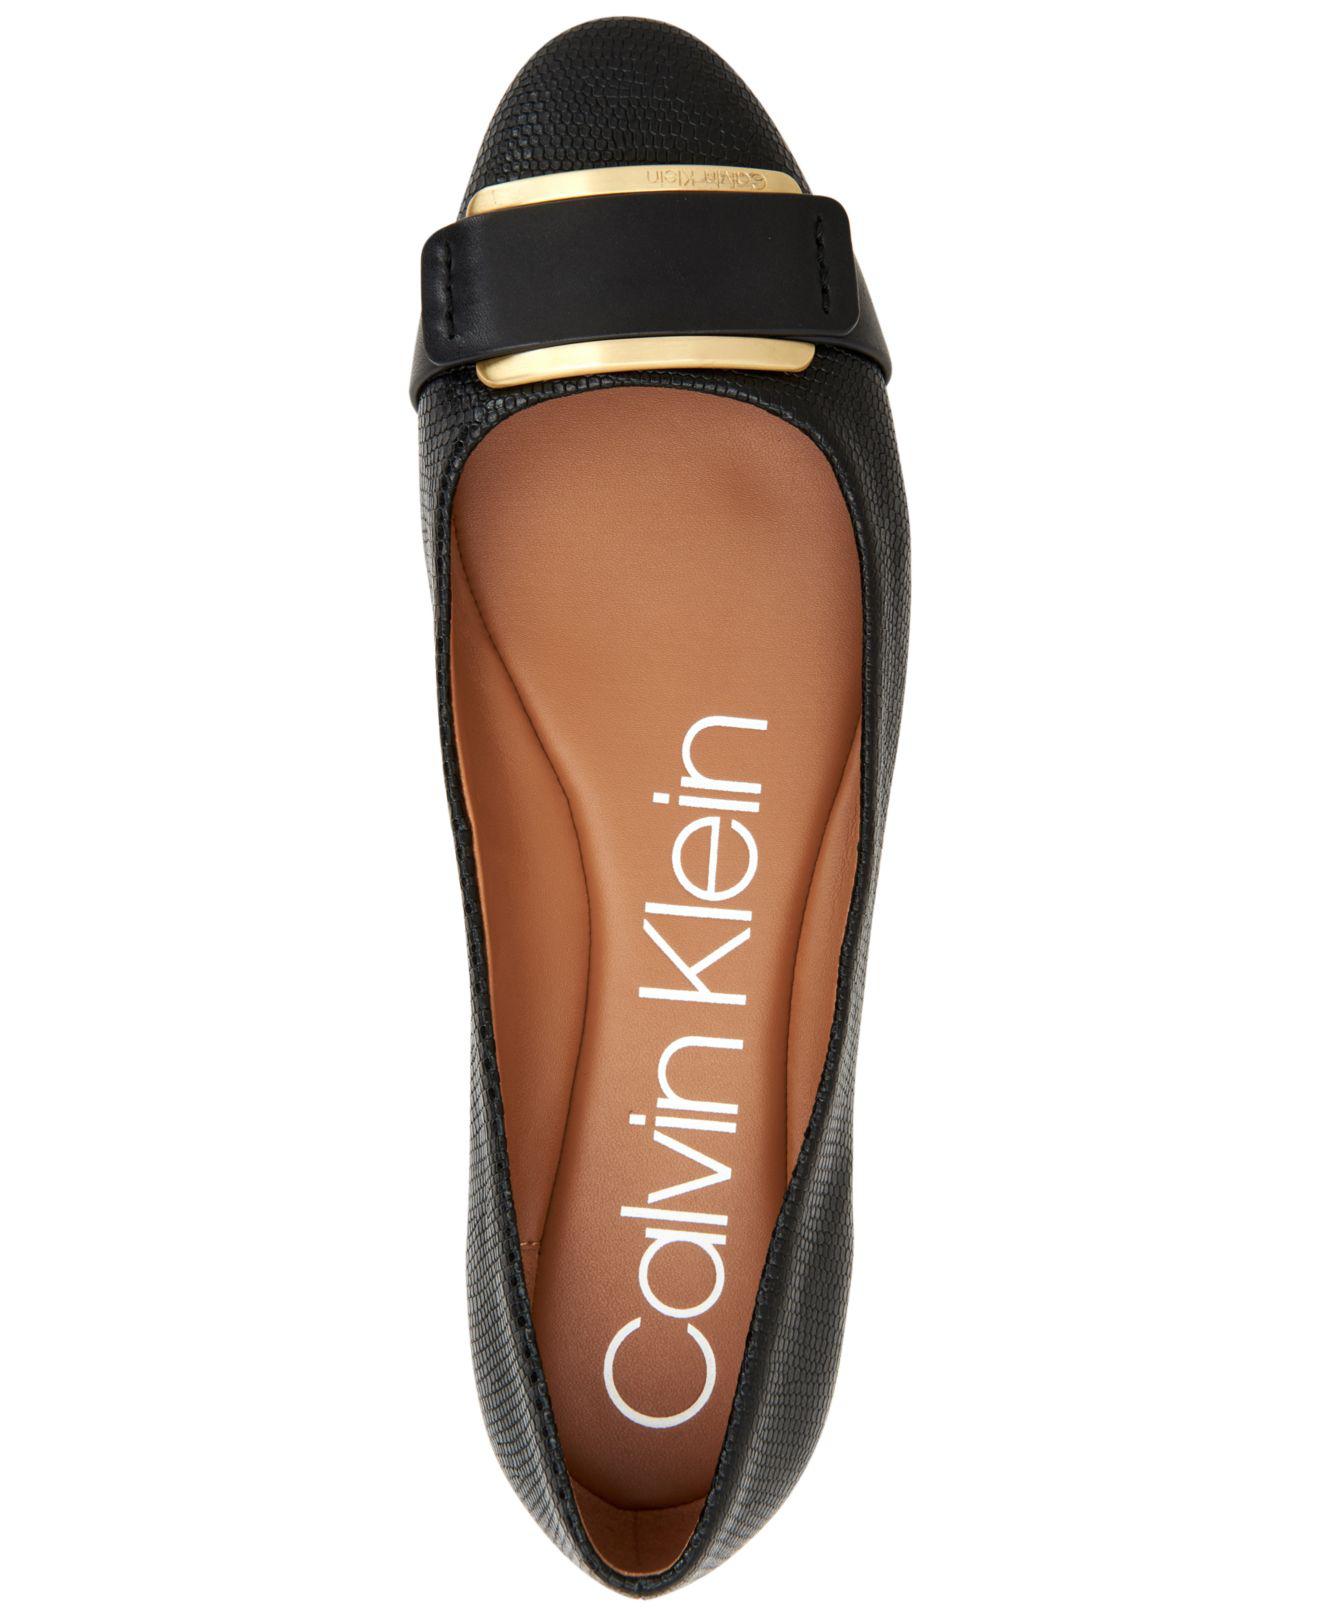 Calvin Klein Ballerina Shoes Outlet Online, UP TO 67% OFF |  www.encuentroguionistas.com